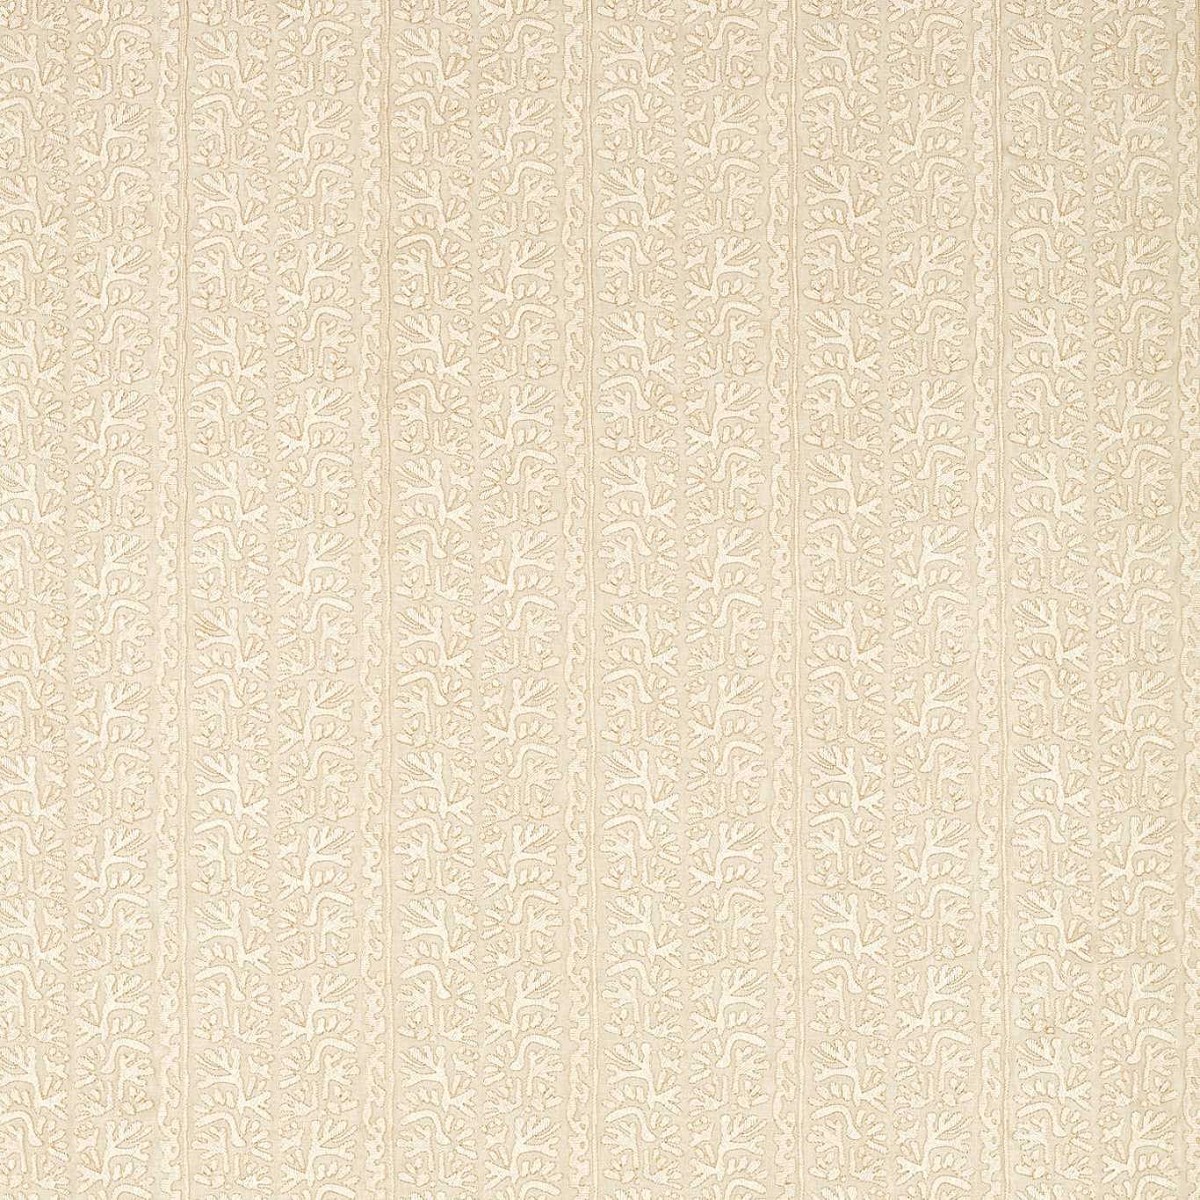 Khorol Almond/Diffused Light Fabric by Harlequin